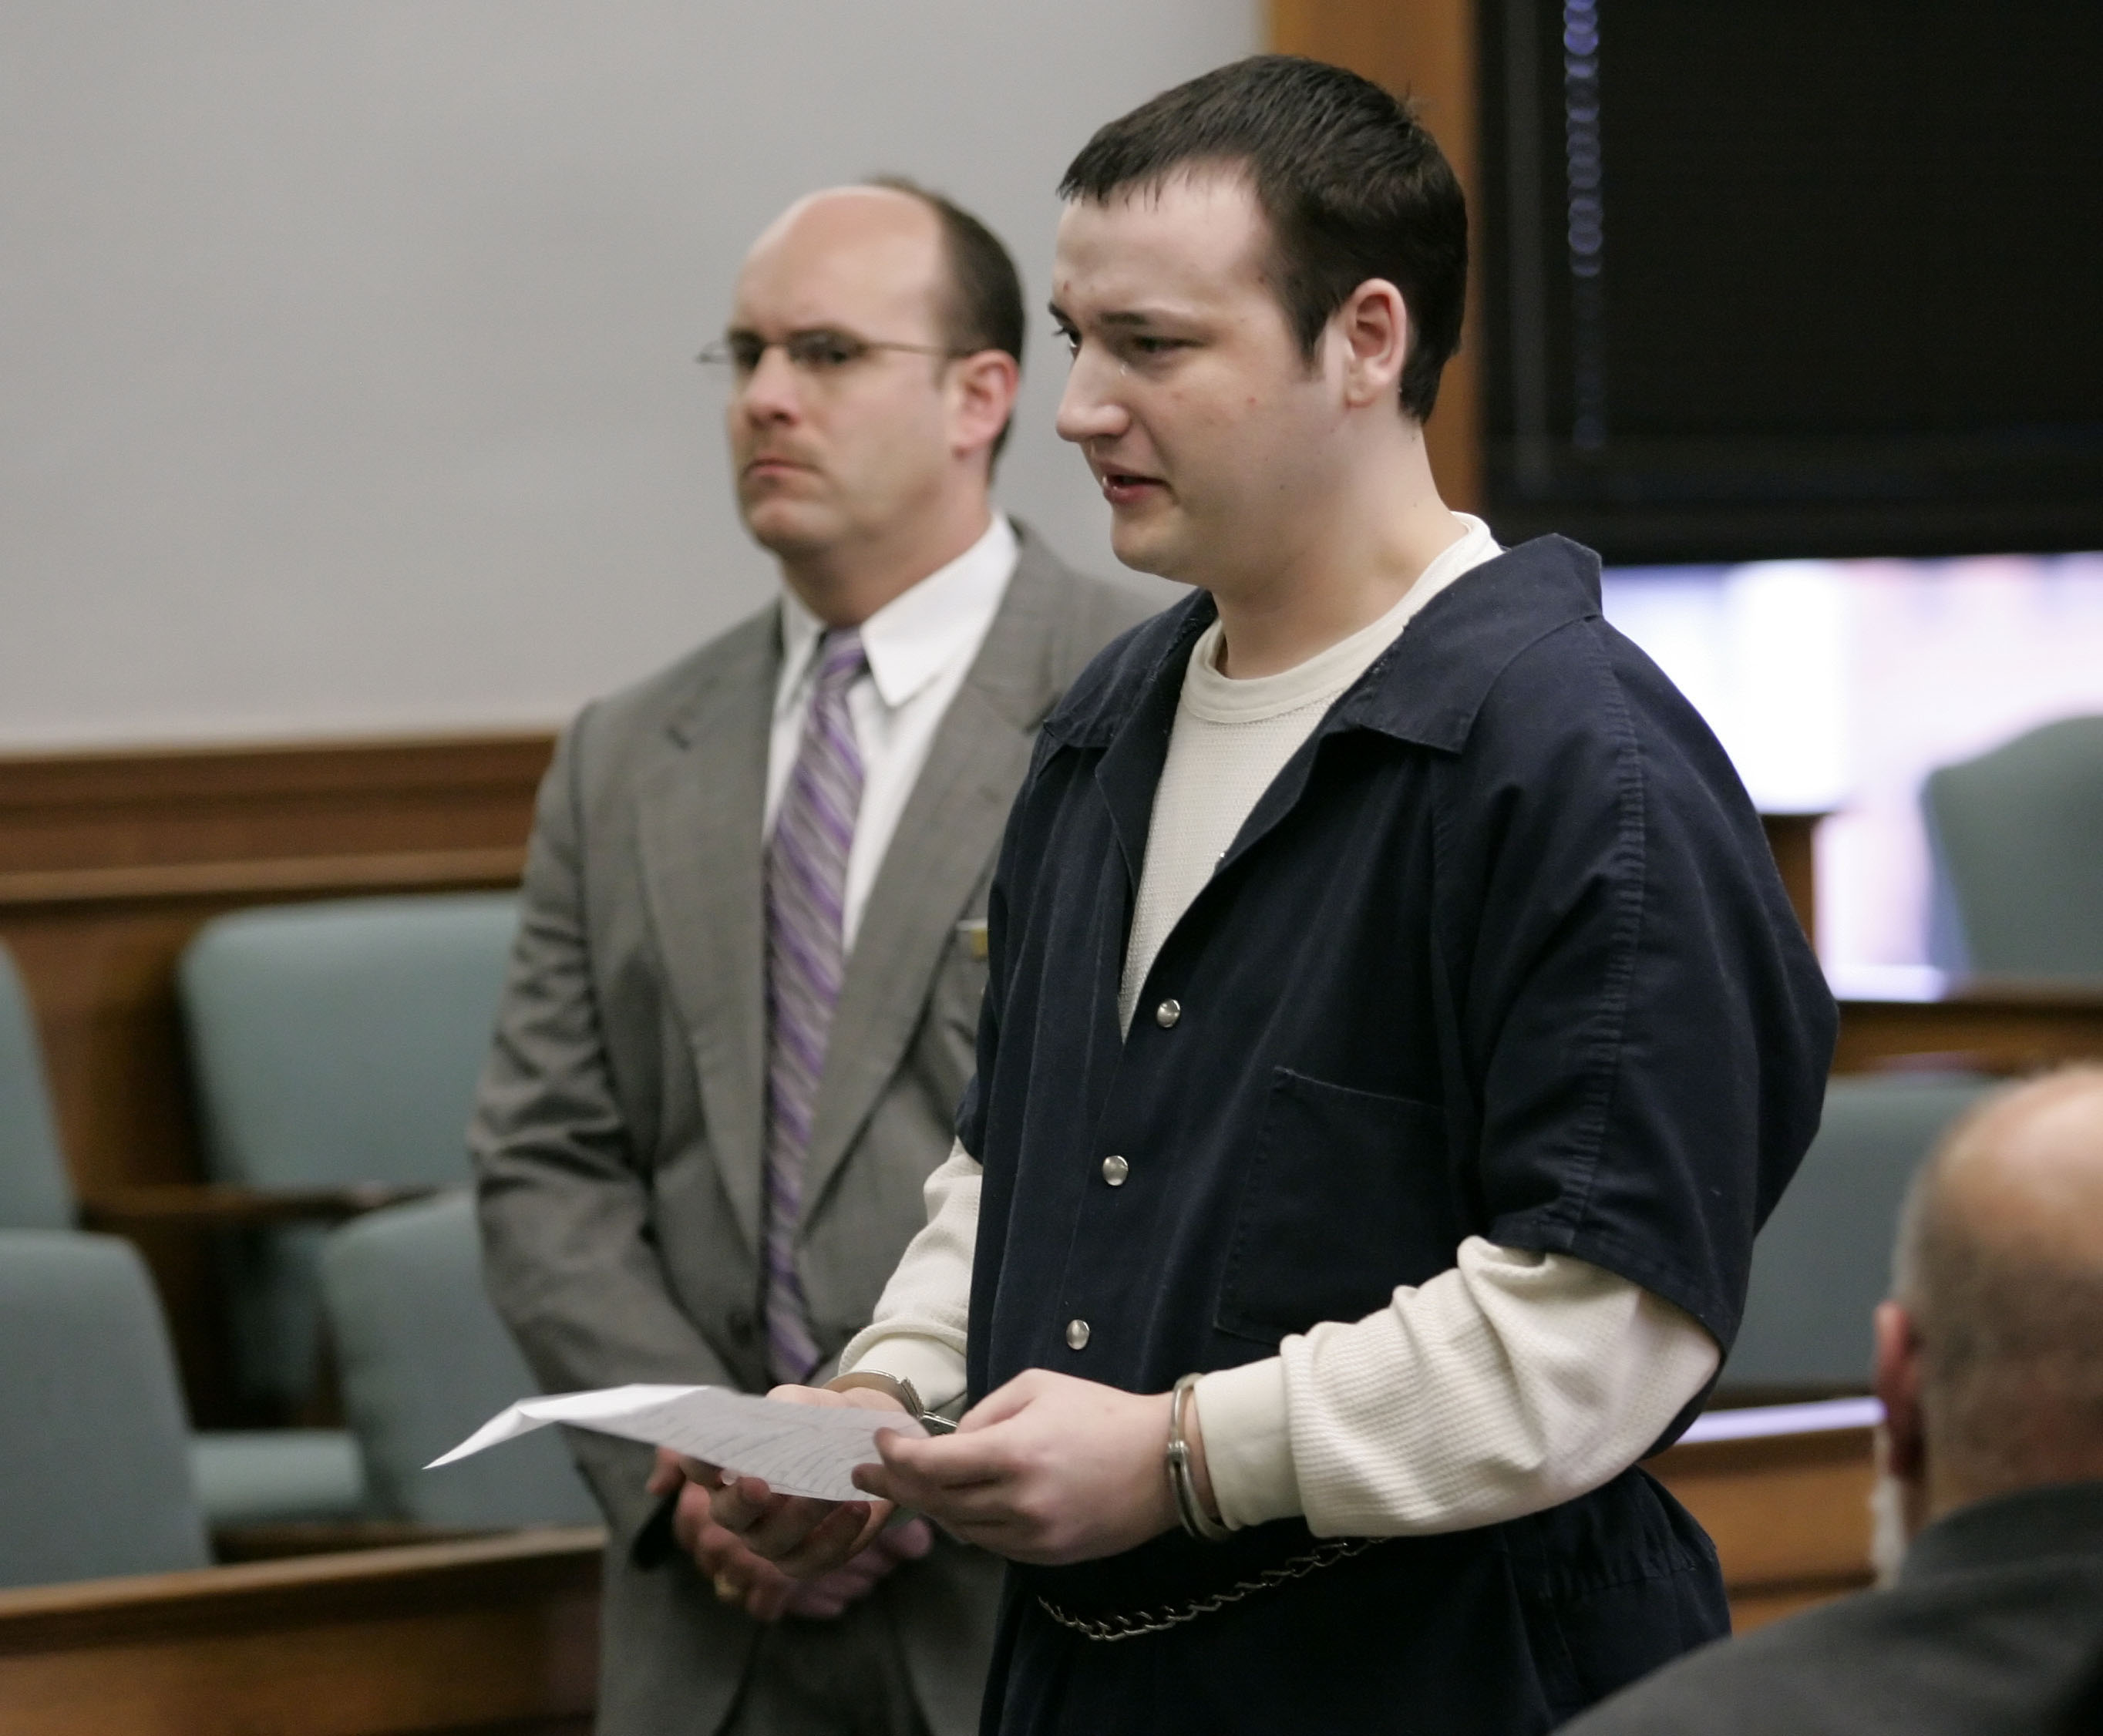 Maumee man convicted in fatal shooting - The Blade